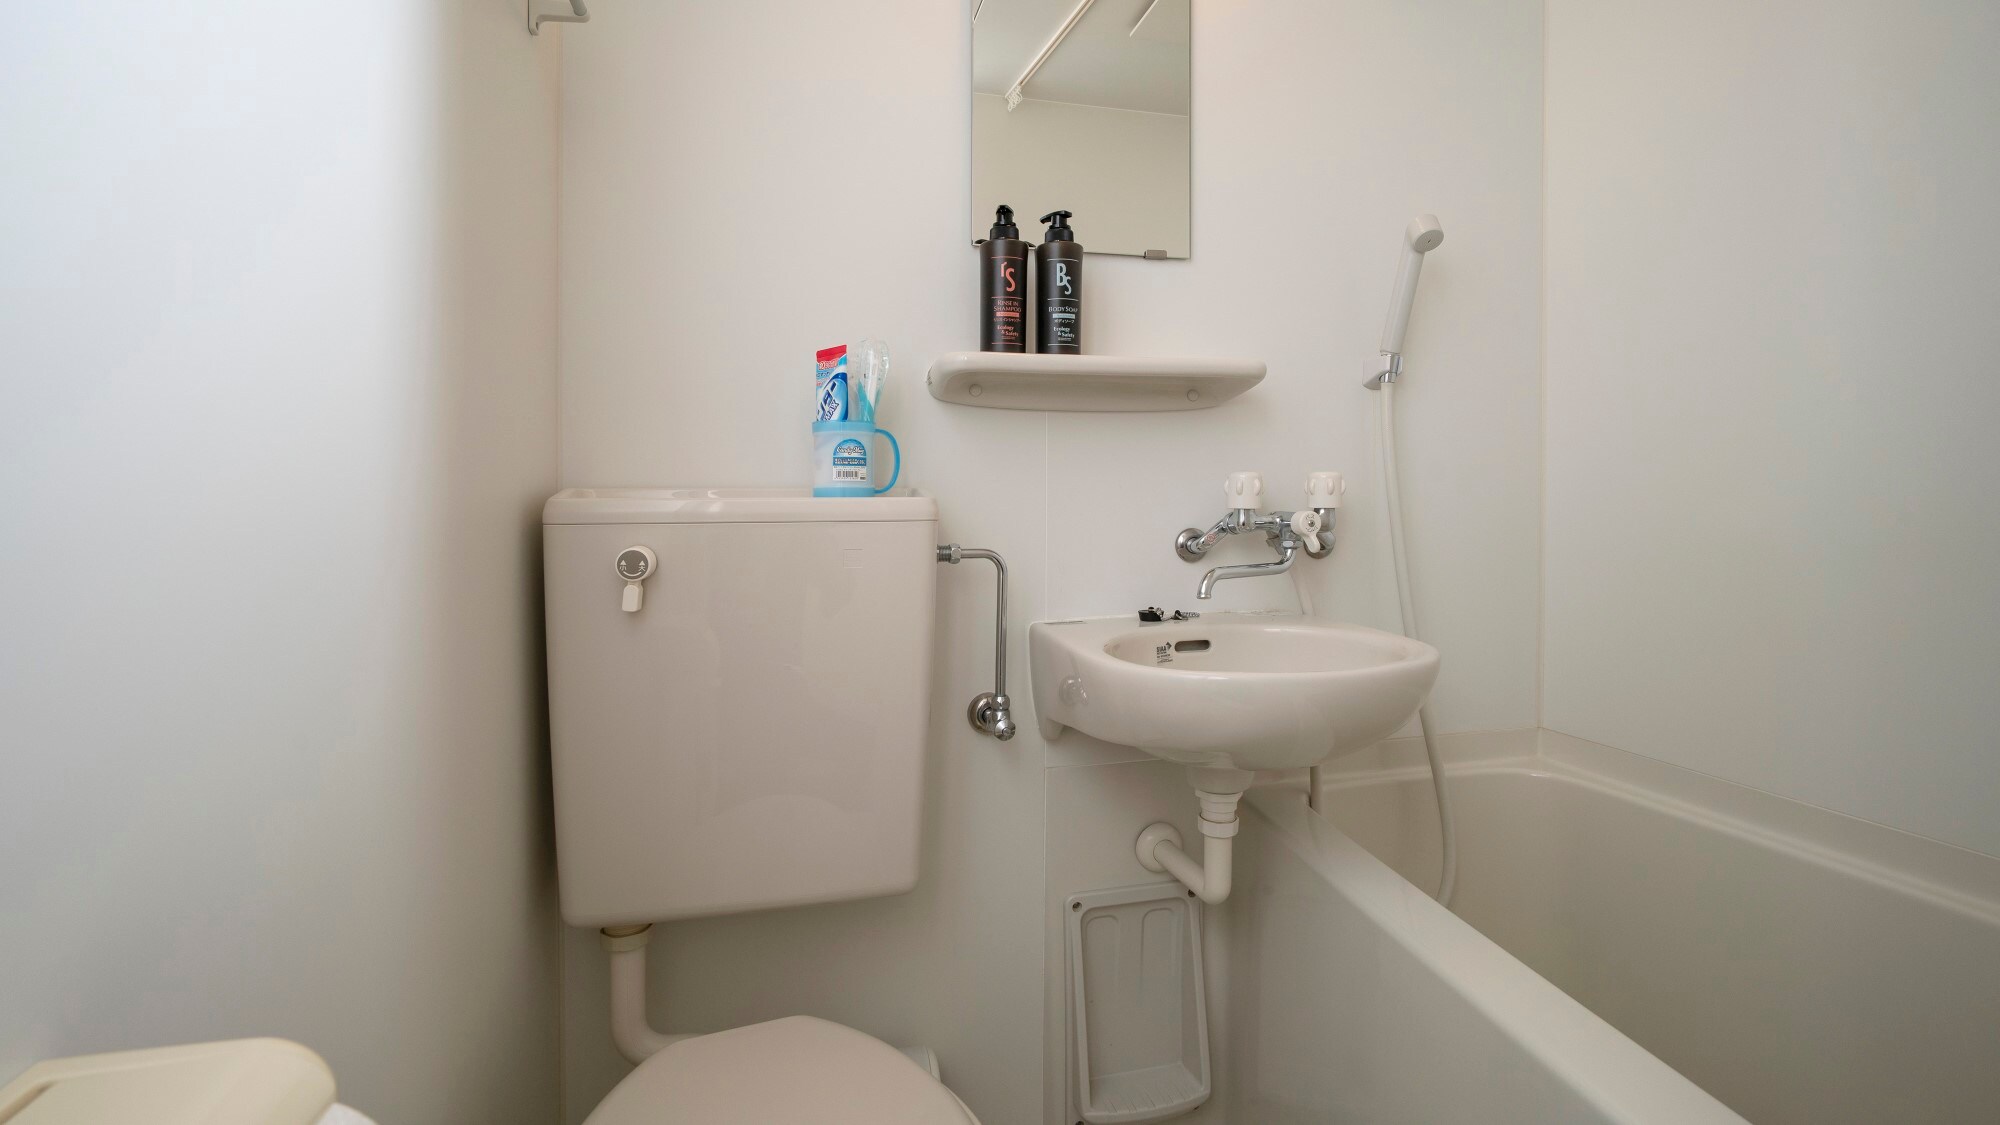 Single room: Each room has a unit bath. Of course, we also provide amenities.